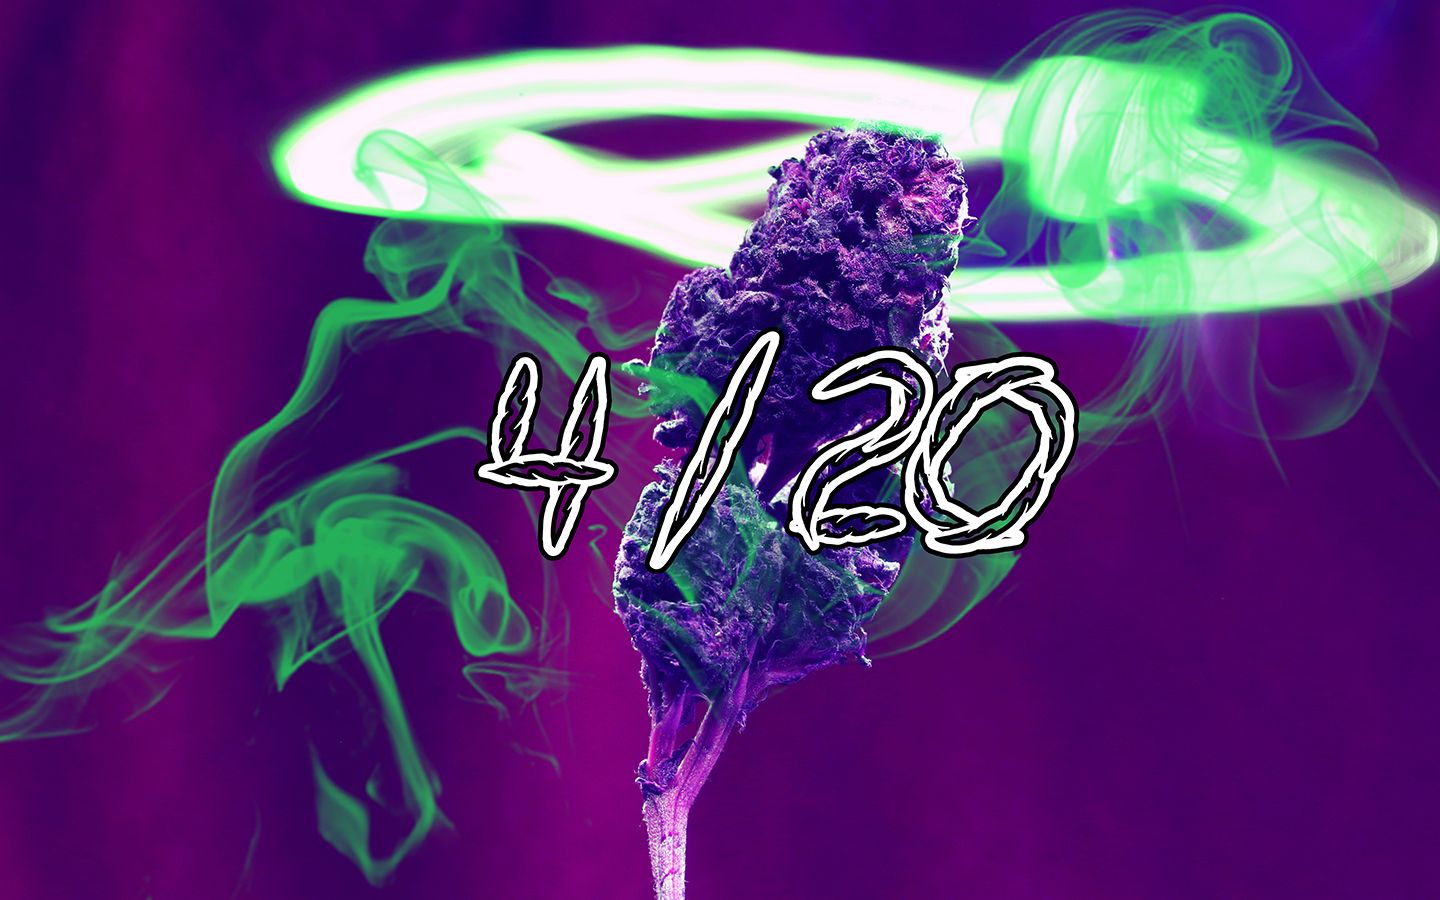 I made some special 420 wallpaper for you, guys!